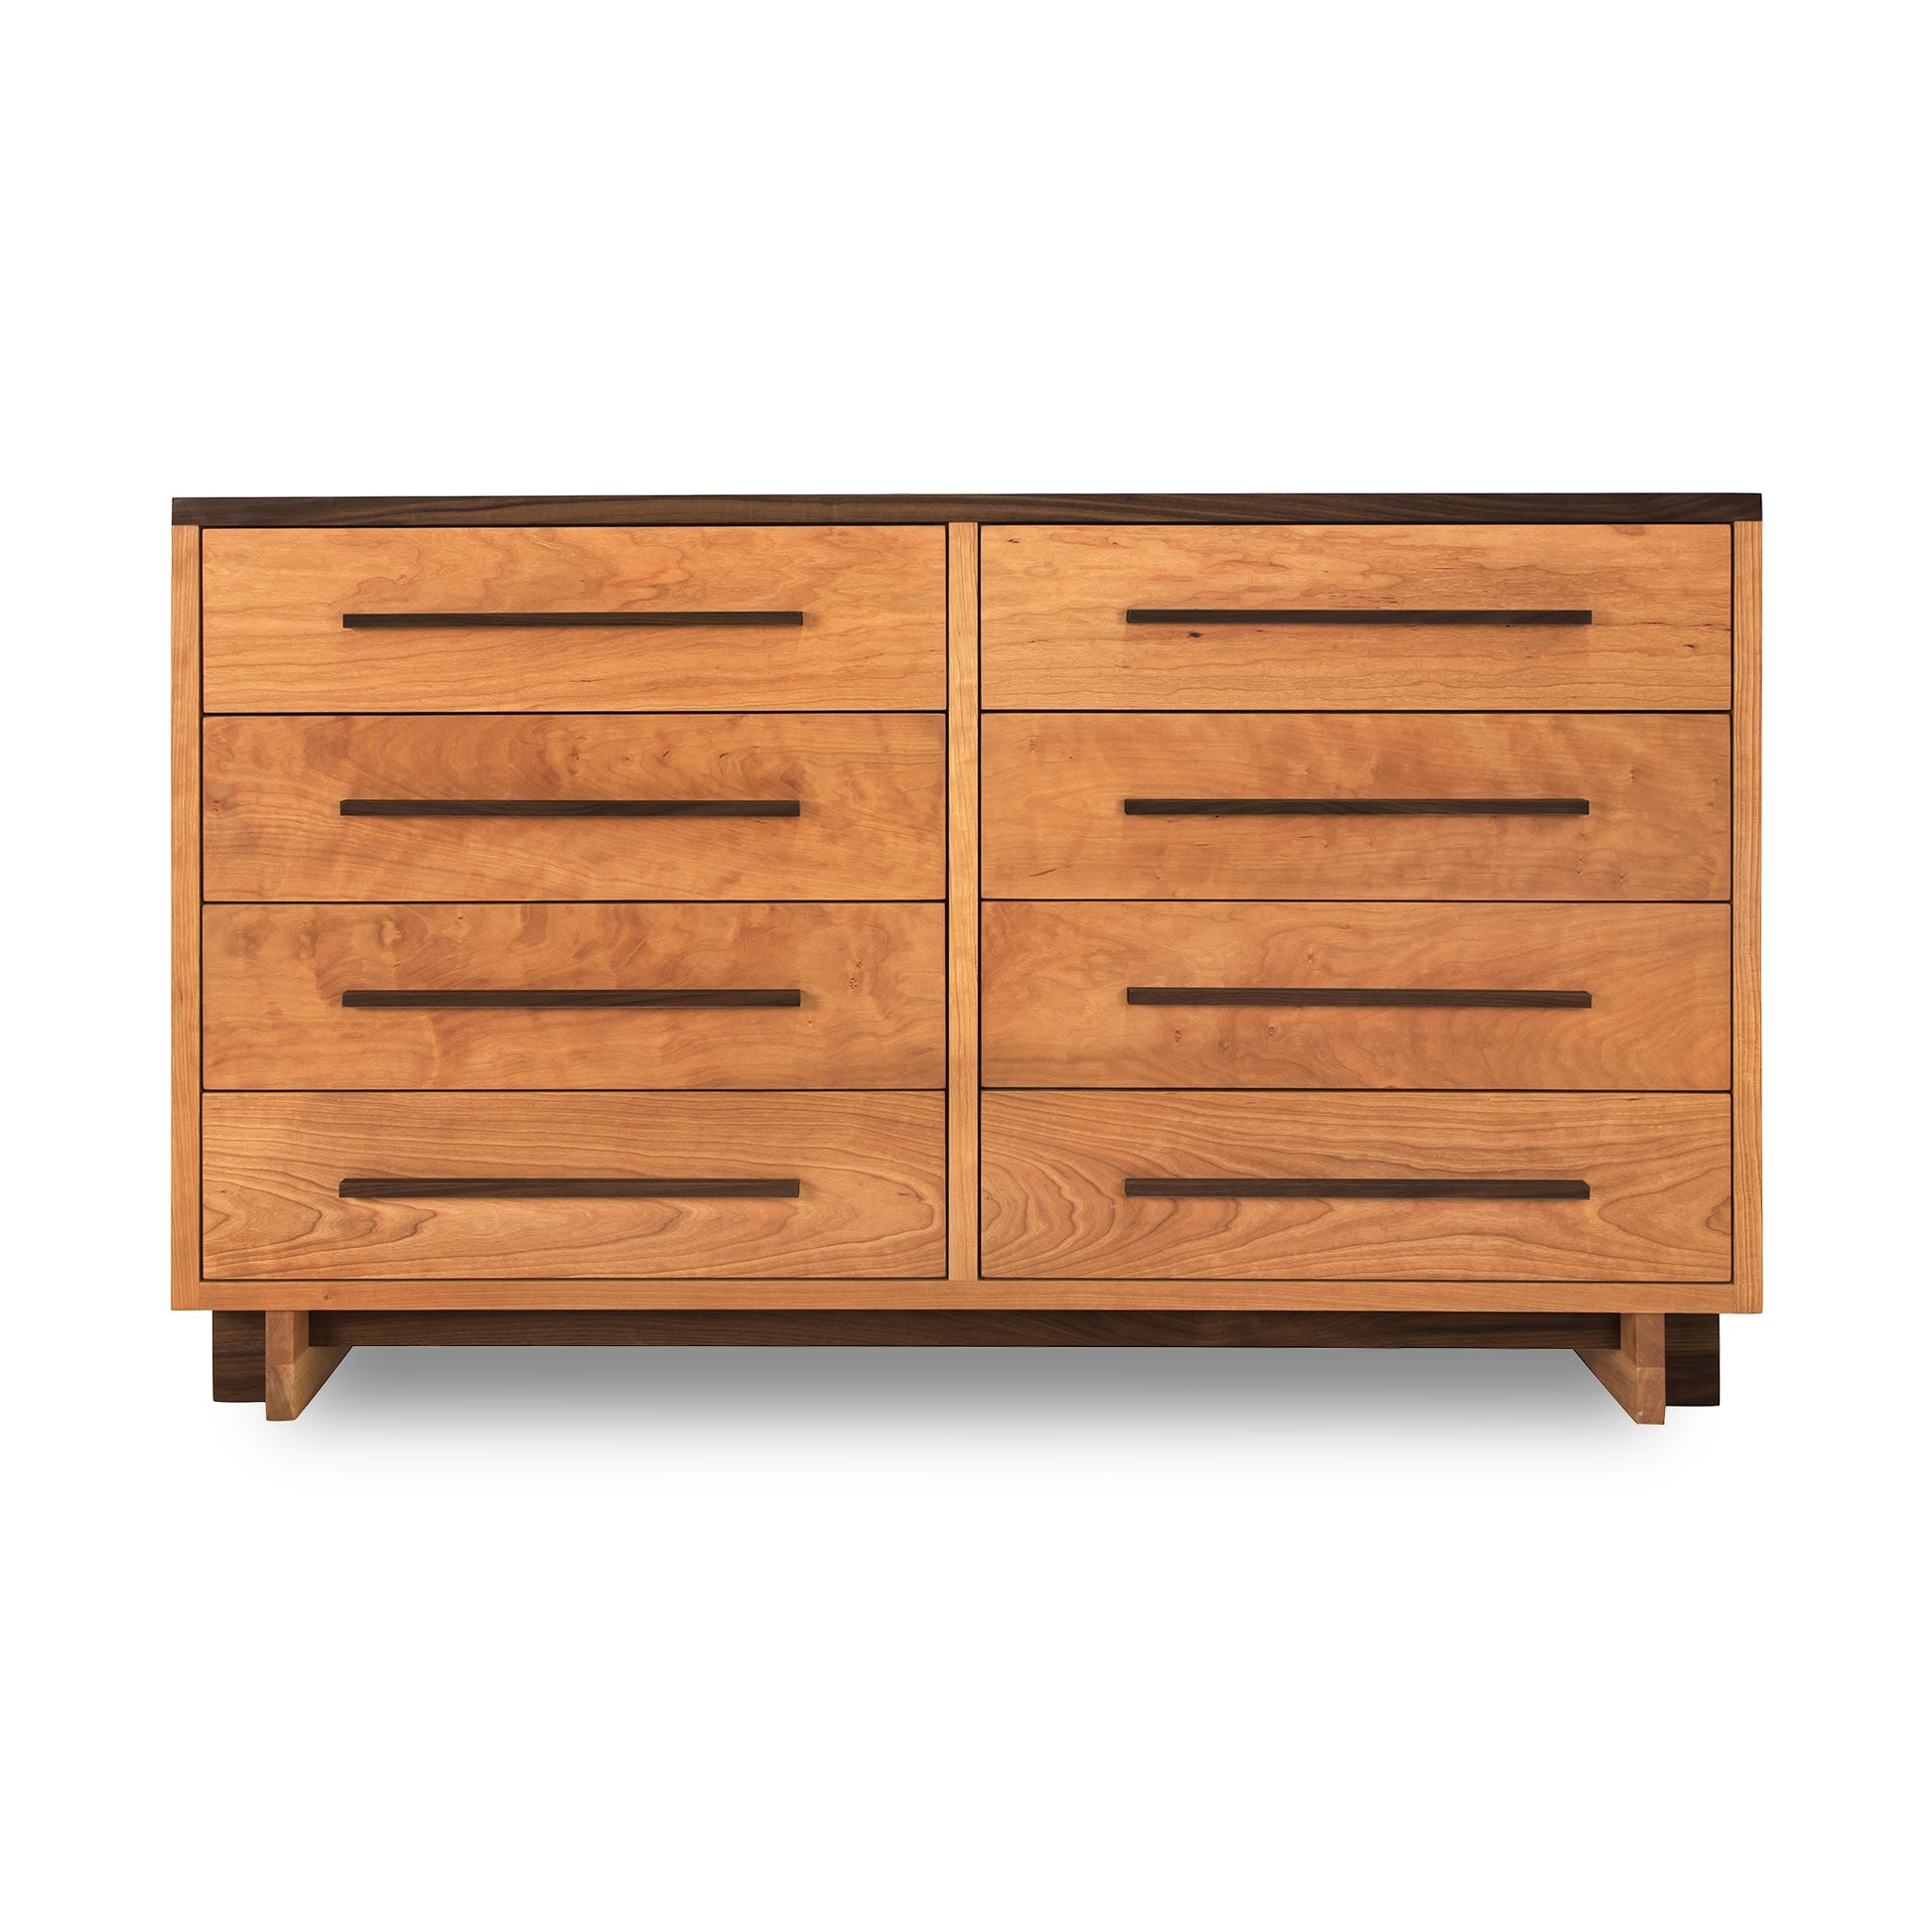 A Modern American 8-Drawer Dresser #1 in cherry wood from Vermont Furniture Designs, with eight horizontal drawers, four on each side, featuring a simple, modern design and a smooth finish, set against a plain white background.